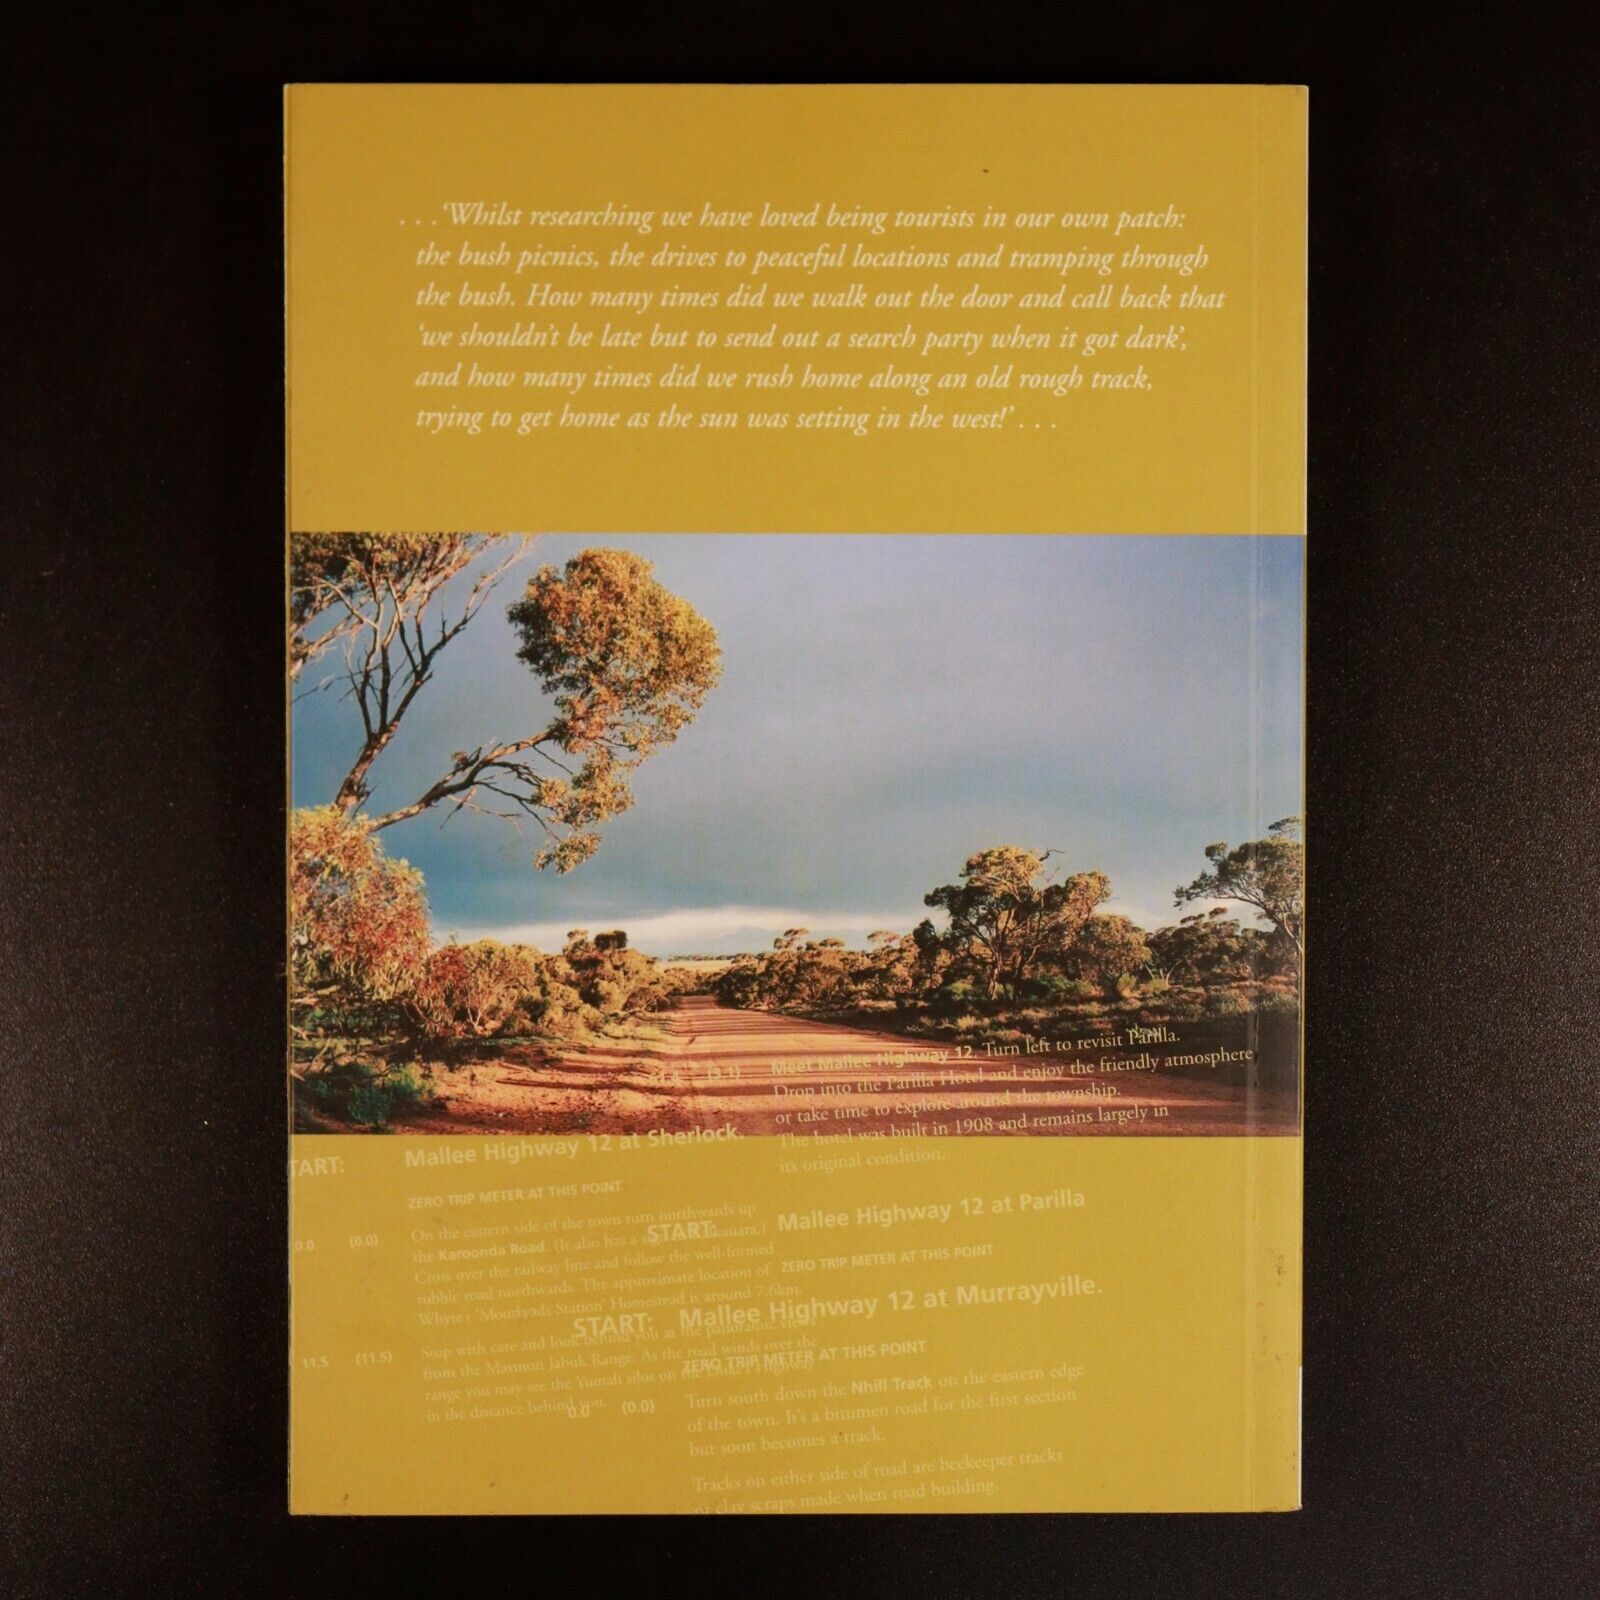 Mallee Tracks A Wanderer's Guide To The South Australian & Victorian Mallee Book